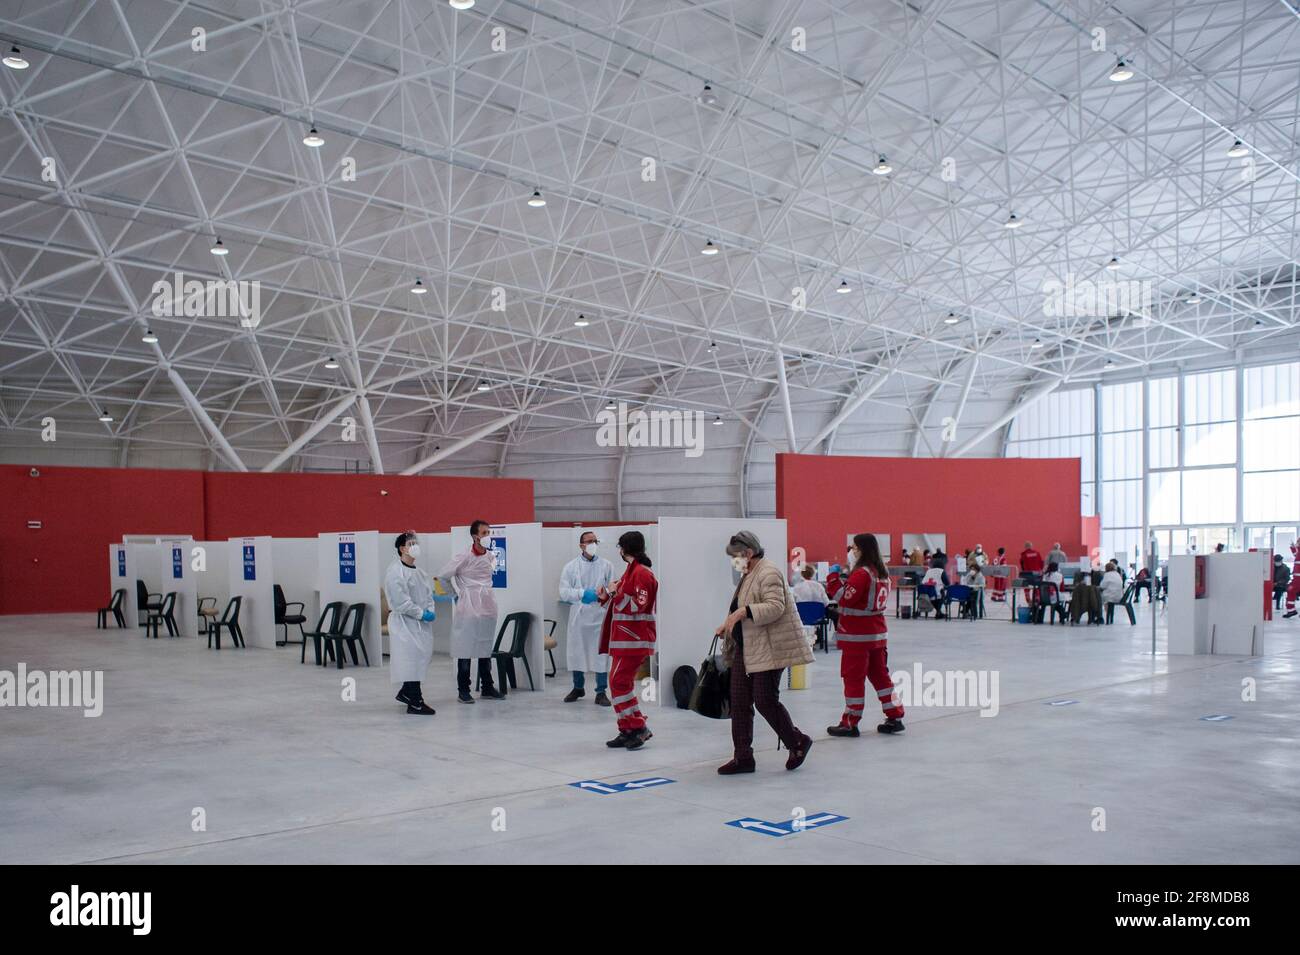 People seen in the vaccination hub's main hall. At the new Covid-19 vaccination hub in the Trade Fair Center (Ente Fiera) in Catanzaro Lido, nearly 500 people aged 70 and older, without particular pathologies, reserved their place for receiving the AstraZeneca vaccine. Members of the Italian Red Cross and Civil Protection help the local sanitary workers in both administrative and sanitary matters for implementing the vaccination programme. Stock Photo